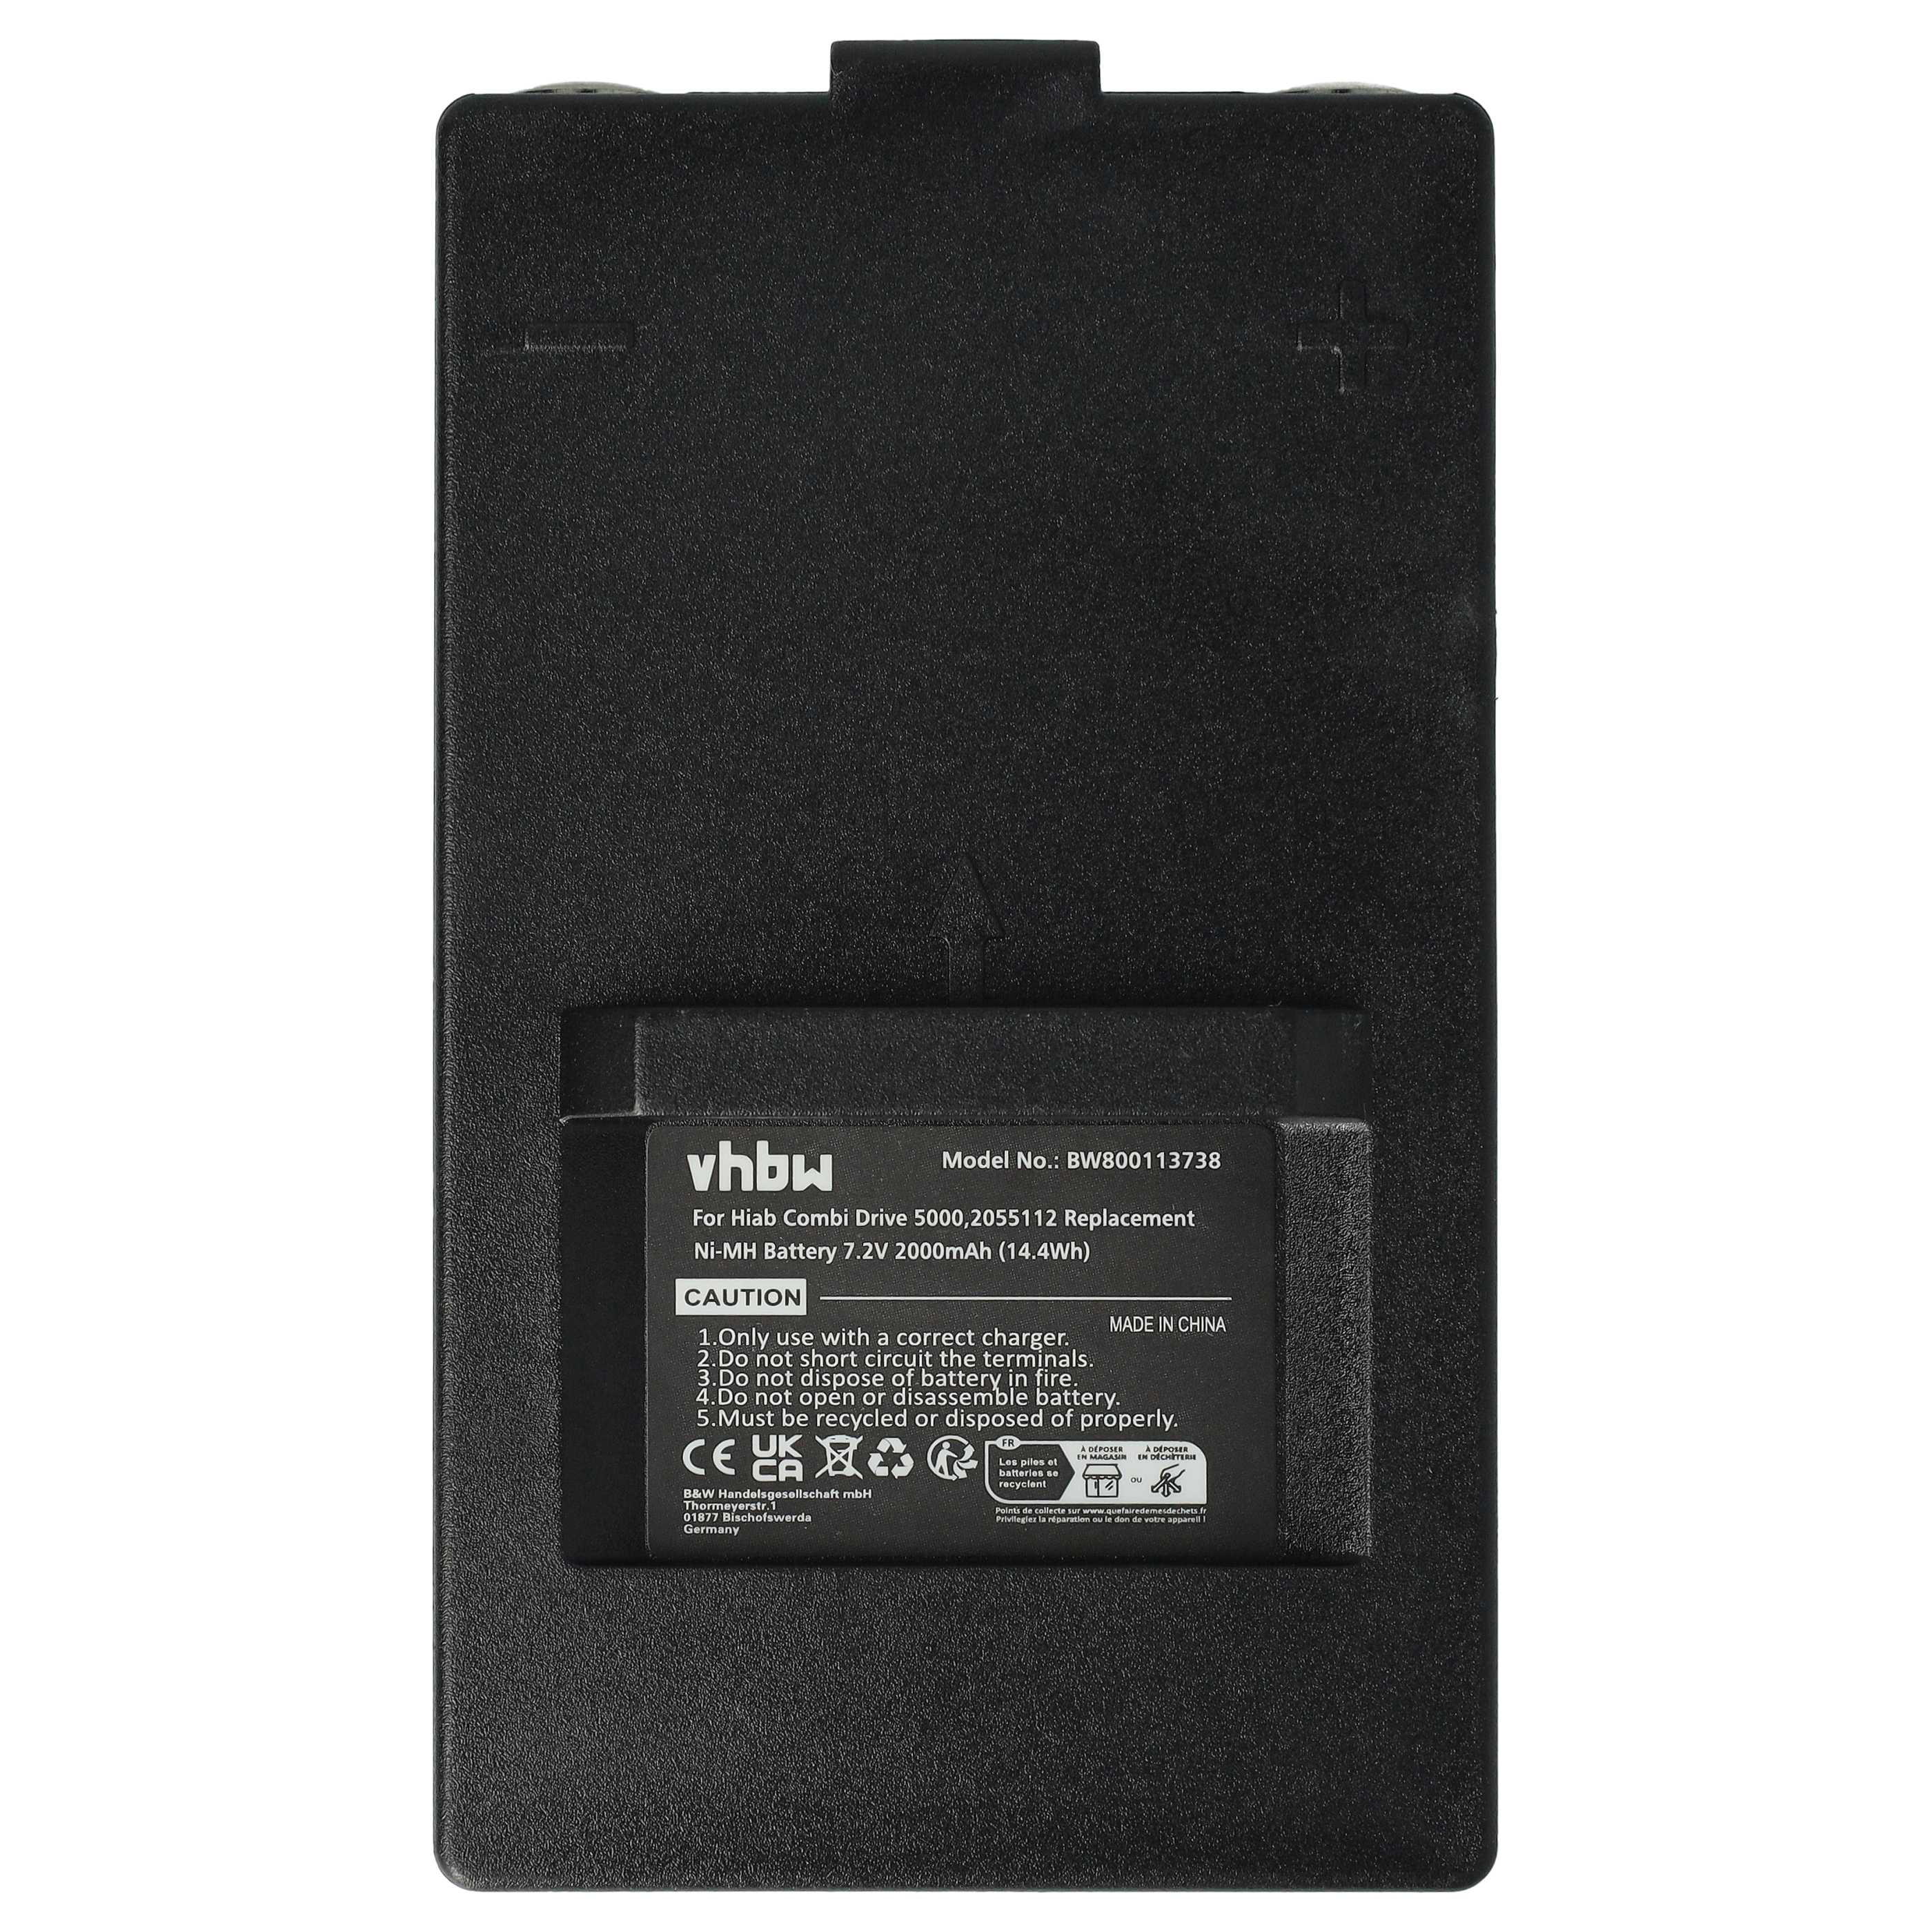 Industrial Remote Control Battery Replacement for 2.250.2011, 2.250.1000, 2.250.2010 - 2000mAh 7.2V NiMH